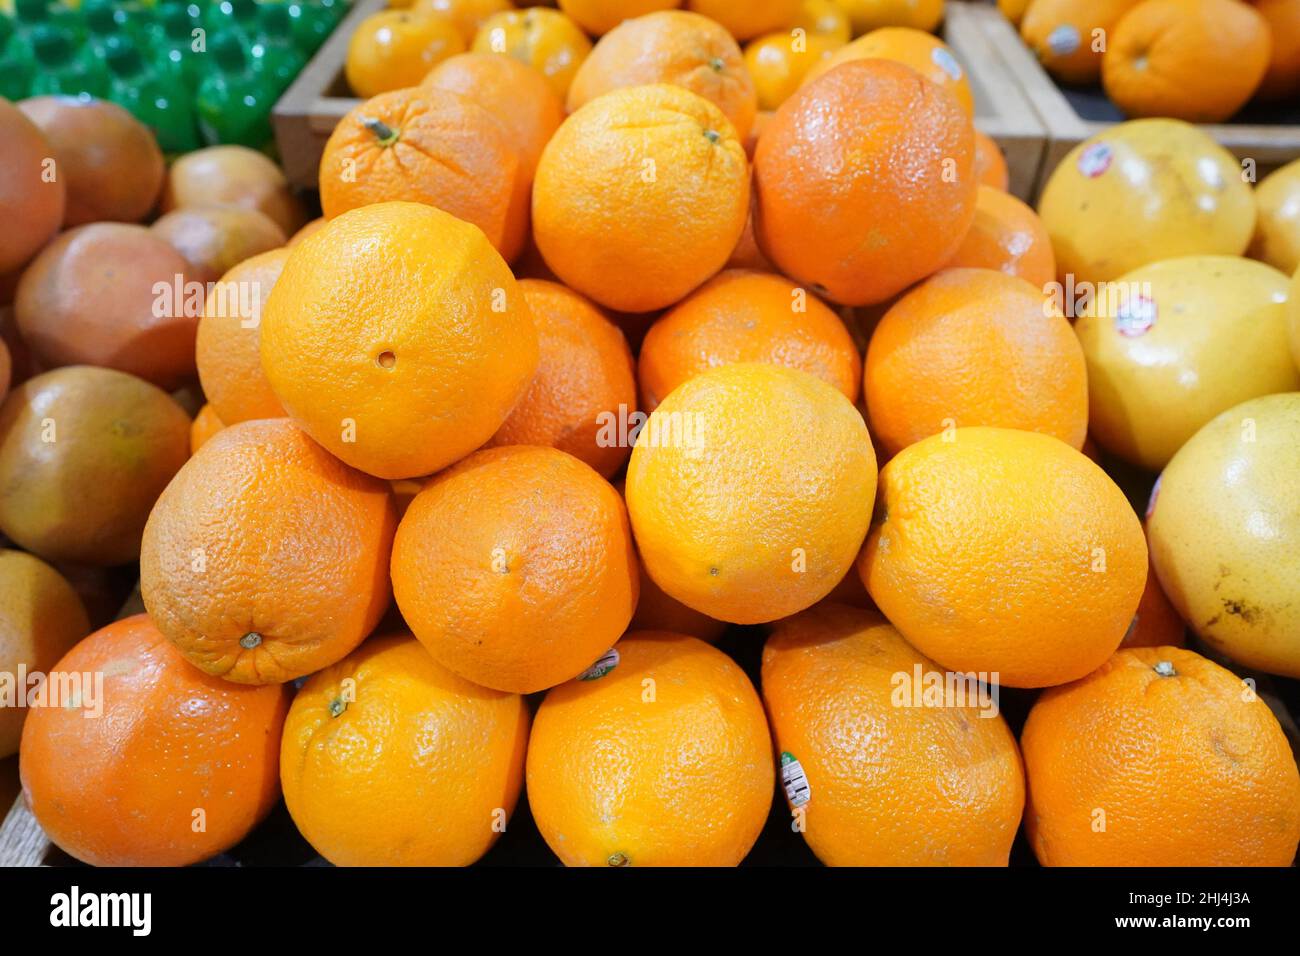 Ladue, United States. 26th Jan, 2022. Bright, plump oranges sit for sale at Schnucks Markets in Ladue, Missouri on Wednesday, January 26, 2022. The U.S. Department of Agriculture warned orange growers may see a low crop yield this year because of the Citrus Greening Diseases. Infected trees bear fruit that are smaller, higher in acidity and lower in sugar. Officials say this years crop could be one of the worst seasons since World War II. Photo by Bill Greenblatt/UPI Credit: UPI/Alamy Live News Stock Photo